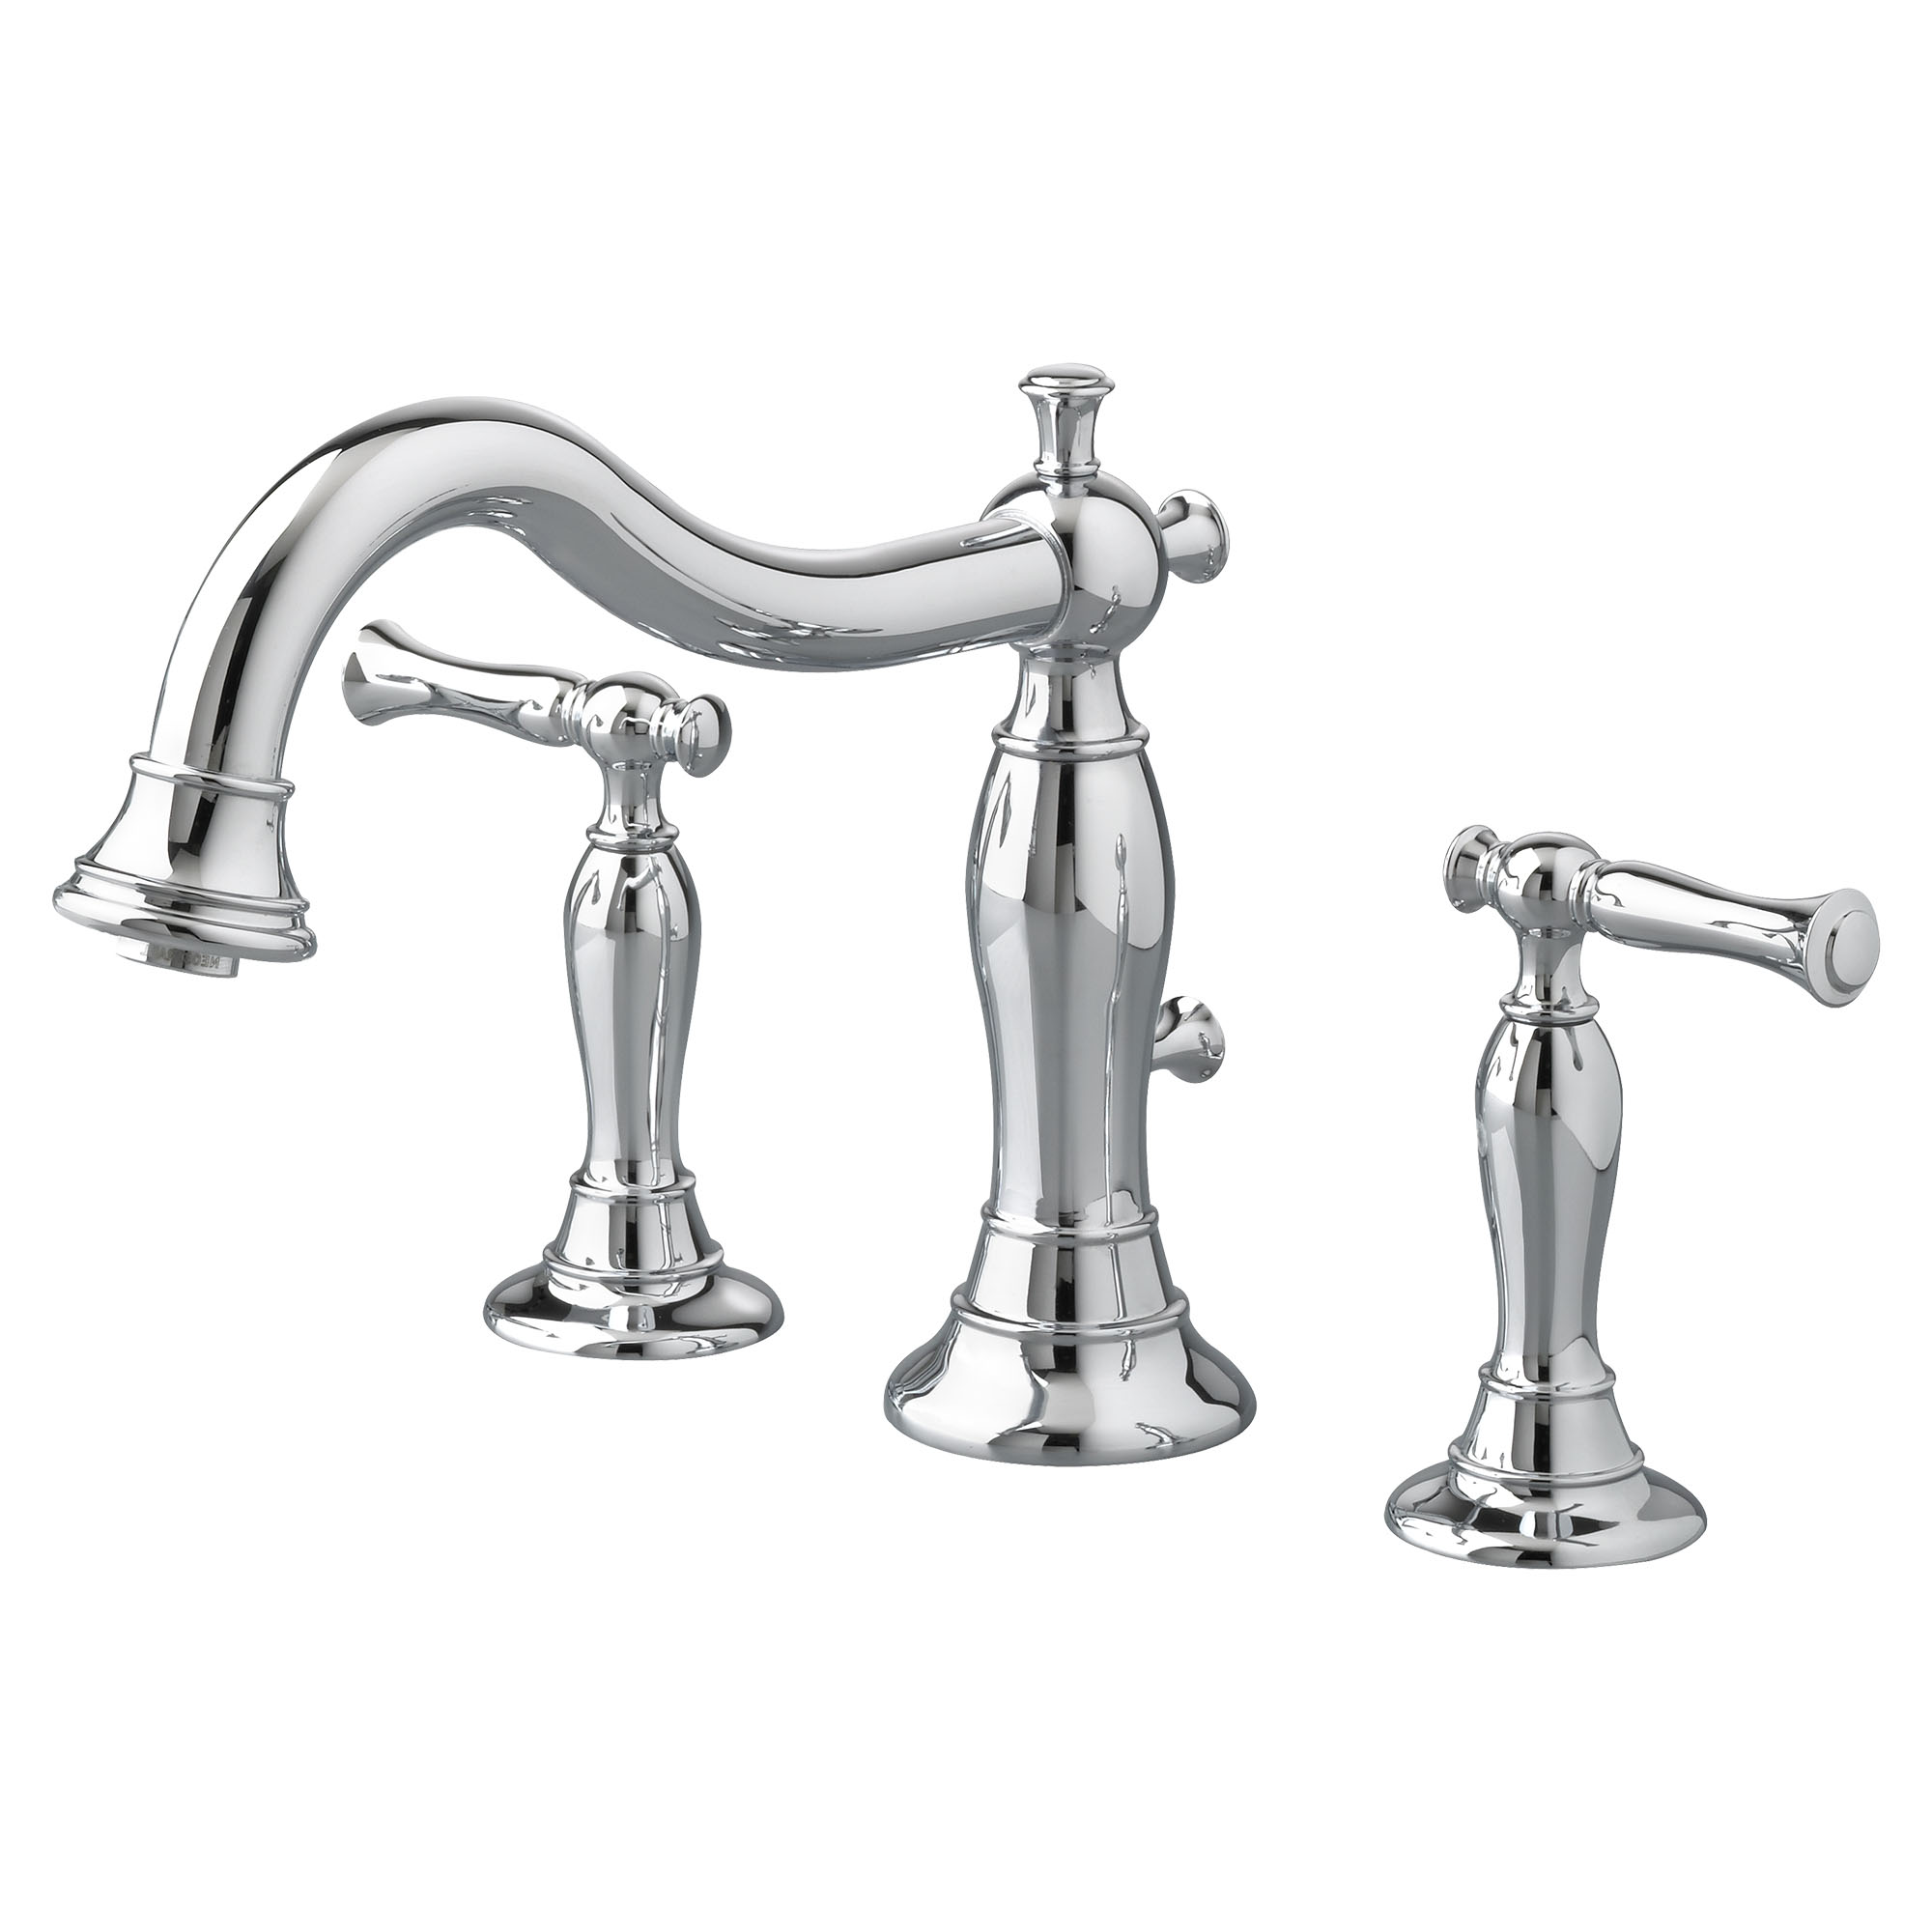 Quentin Bathtub Faucet for Flash Rough-in Valve with Lever Handles